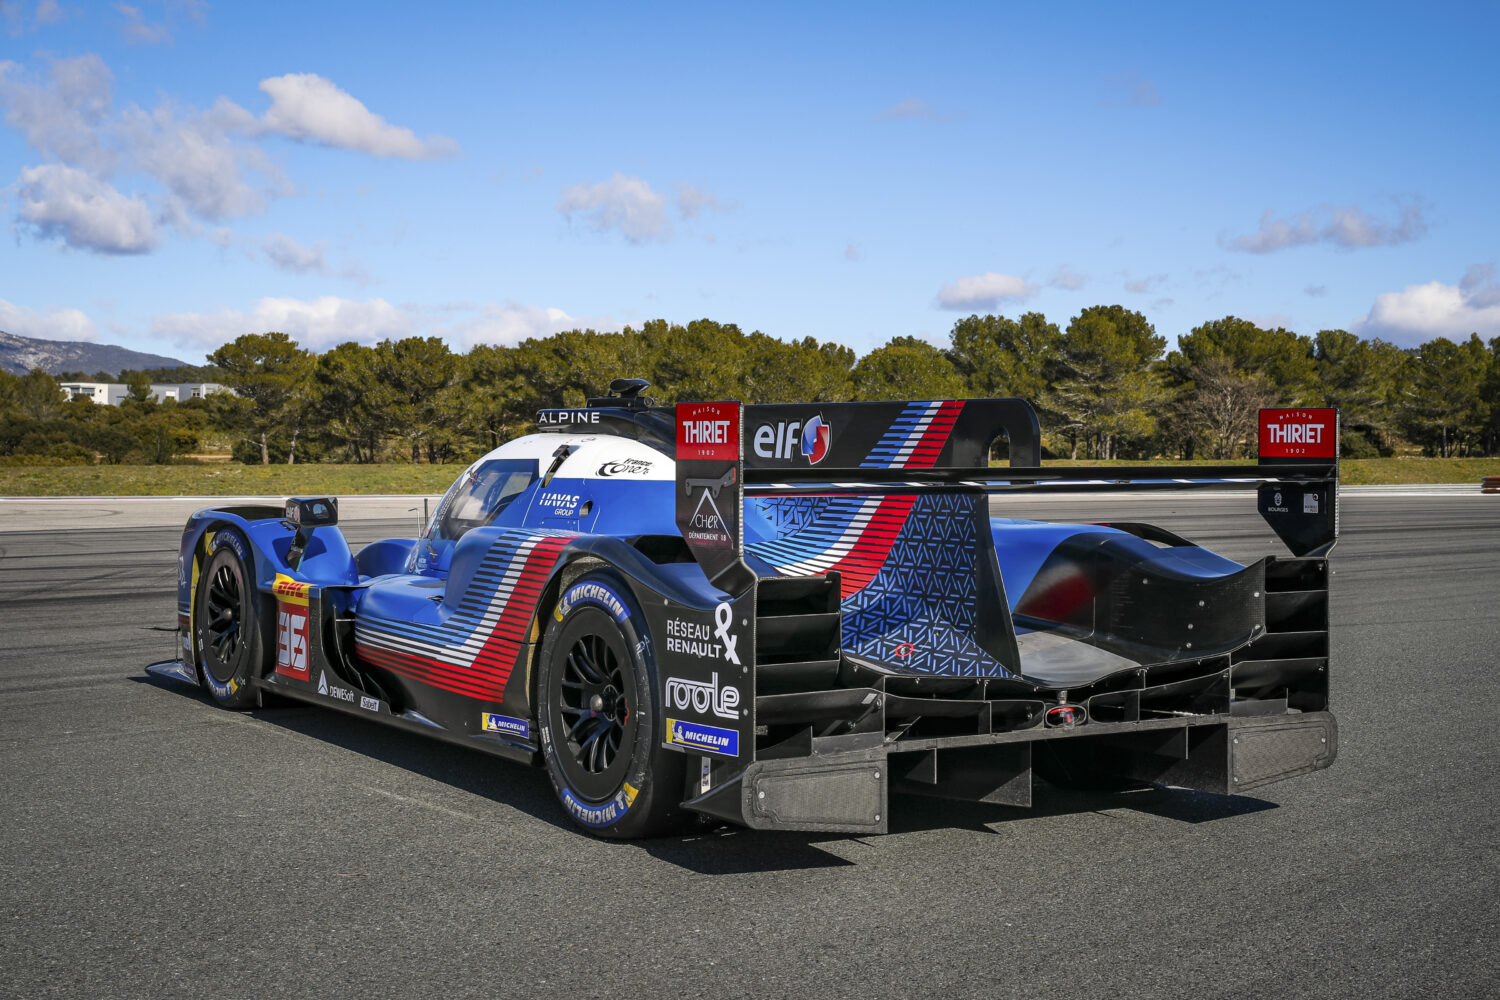 29-2022 - Alpine A480 - Tests Sessions on the Castellet circuit – Alpine A480 N°36 Alpine Elf (Lapierre - Negrao - Vaxiviere).jpeg